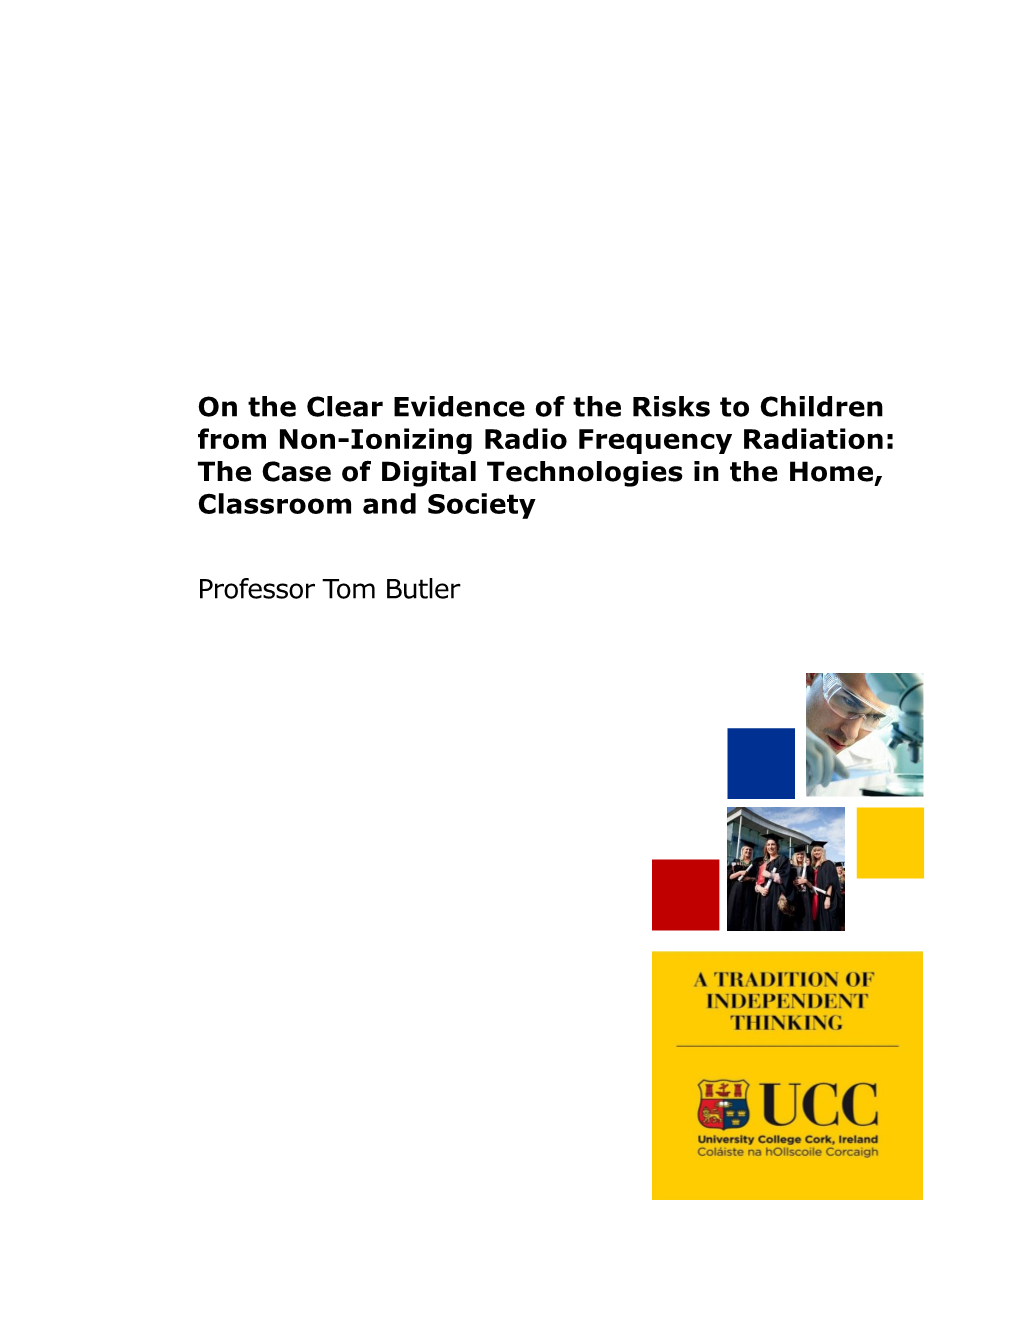 On the Clear Evidence of the Risks to Children from Non-Ionizing Radio Frequency Radiation: the Case of Digital Technologies in the Home, Classroom and Society